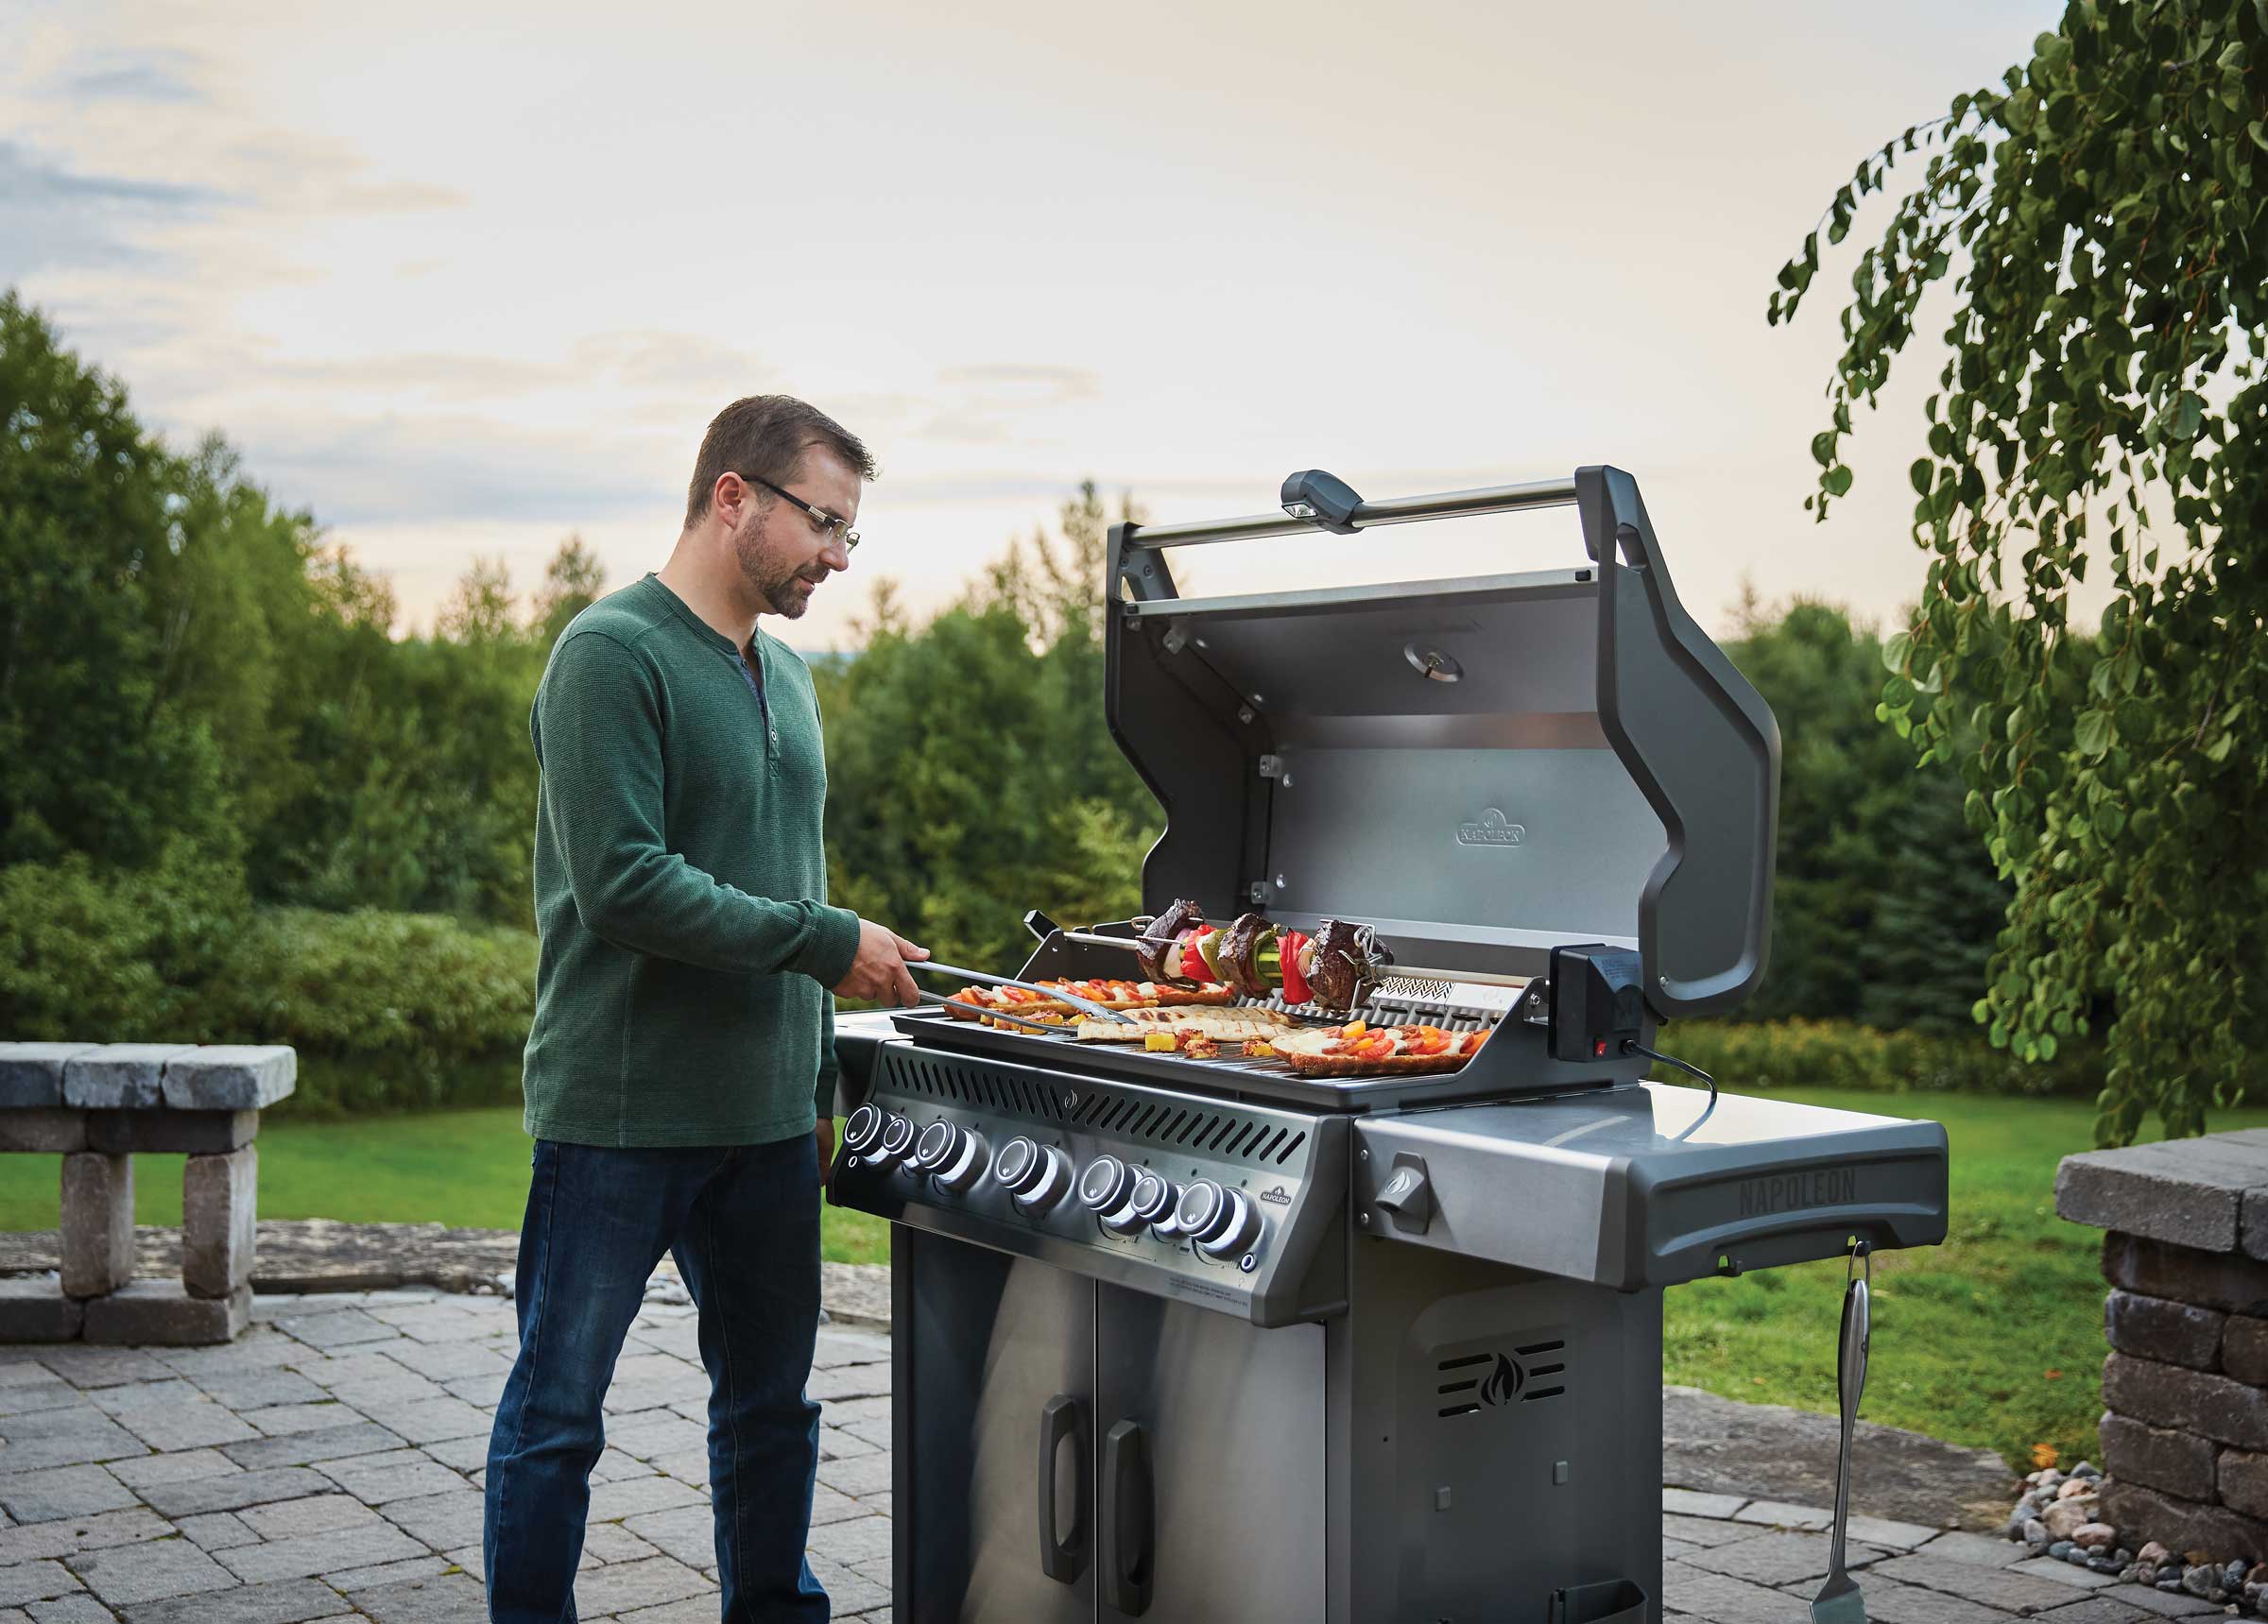 Man grilling on large Napoleon grill in evening